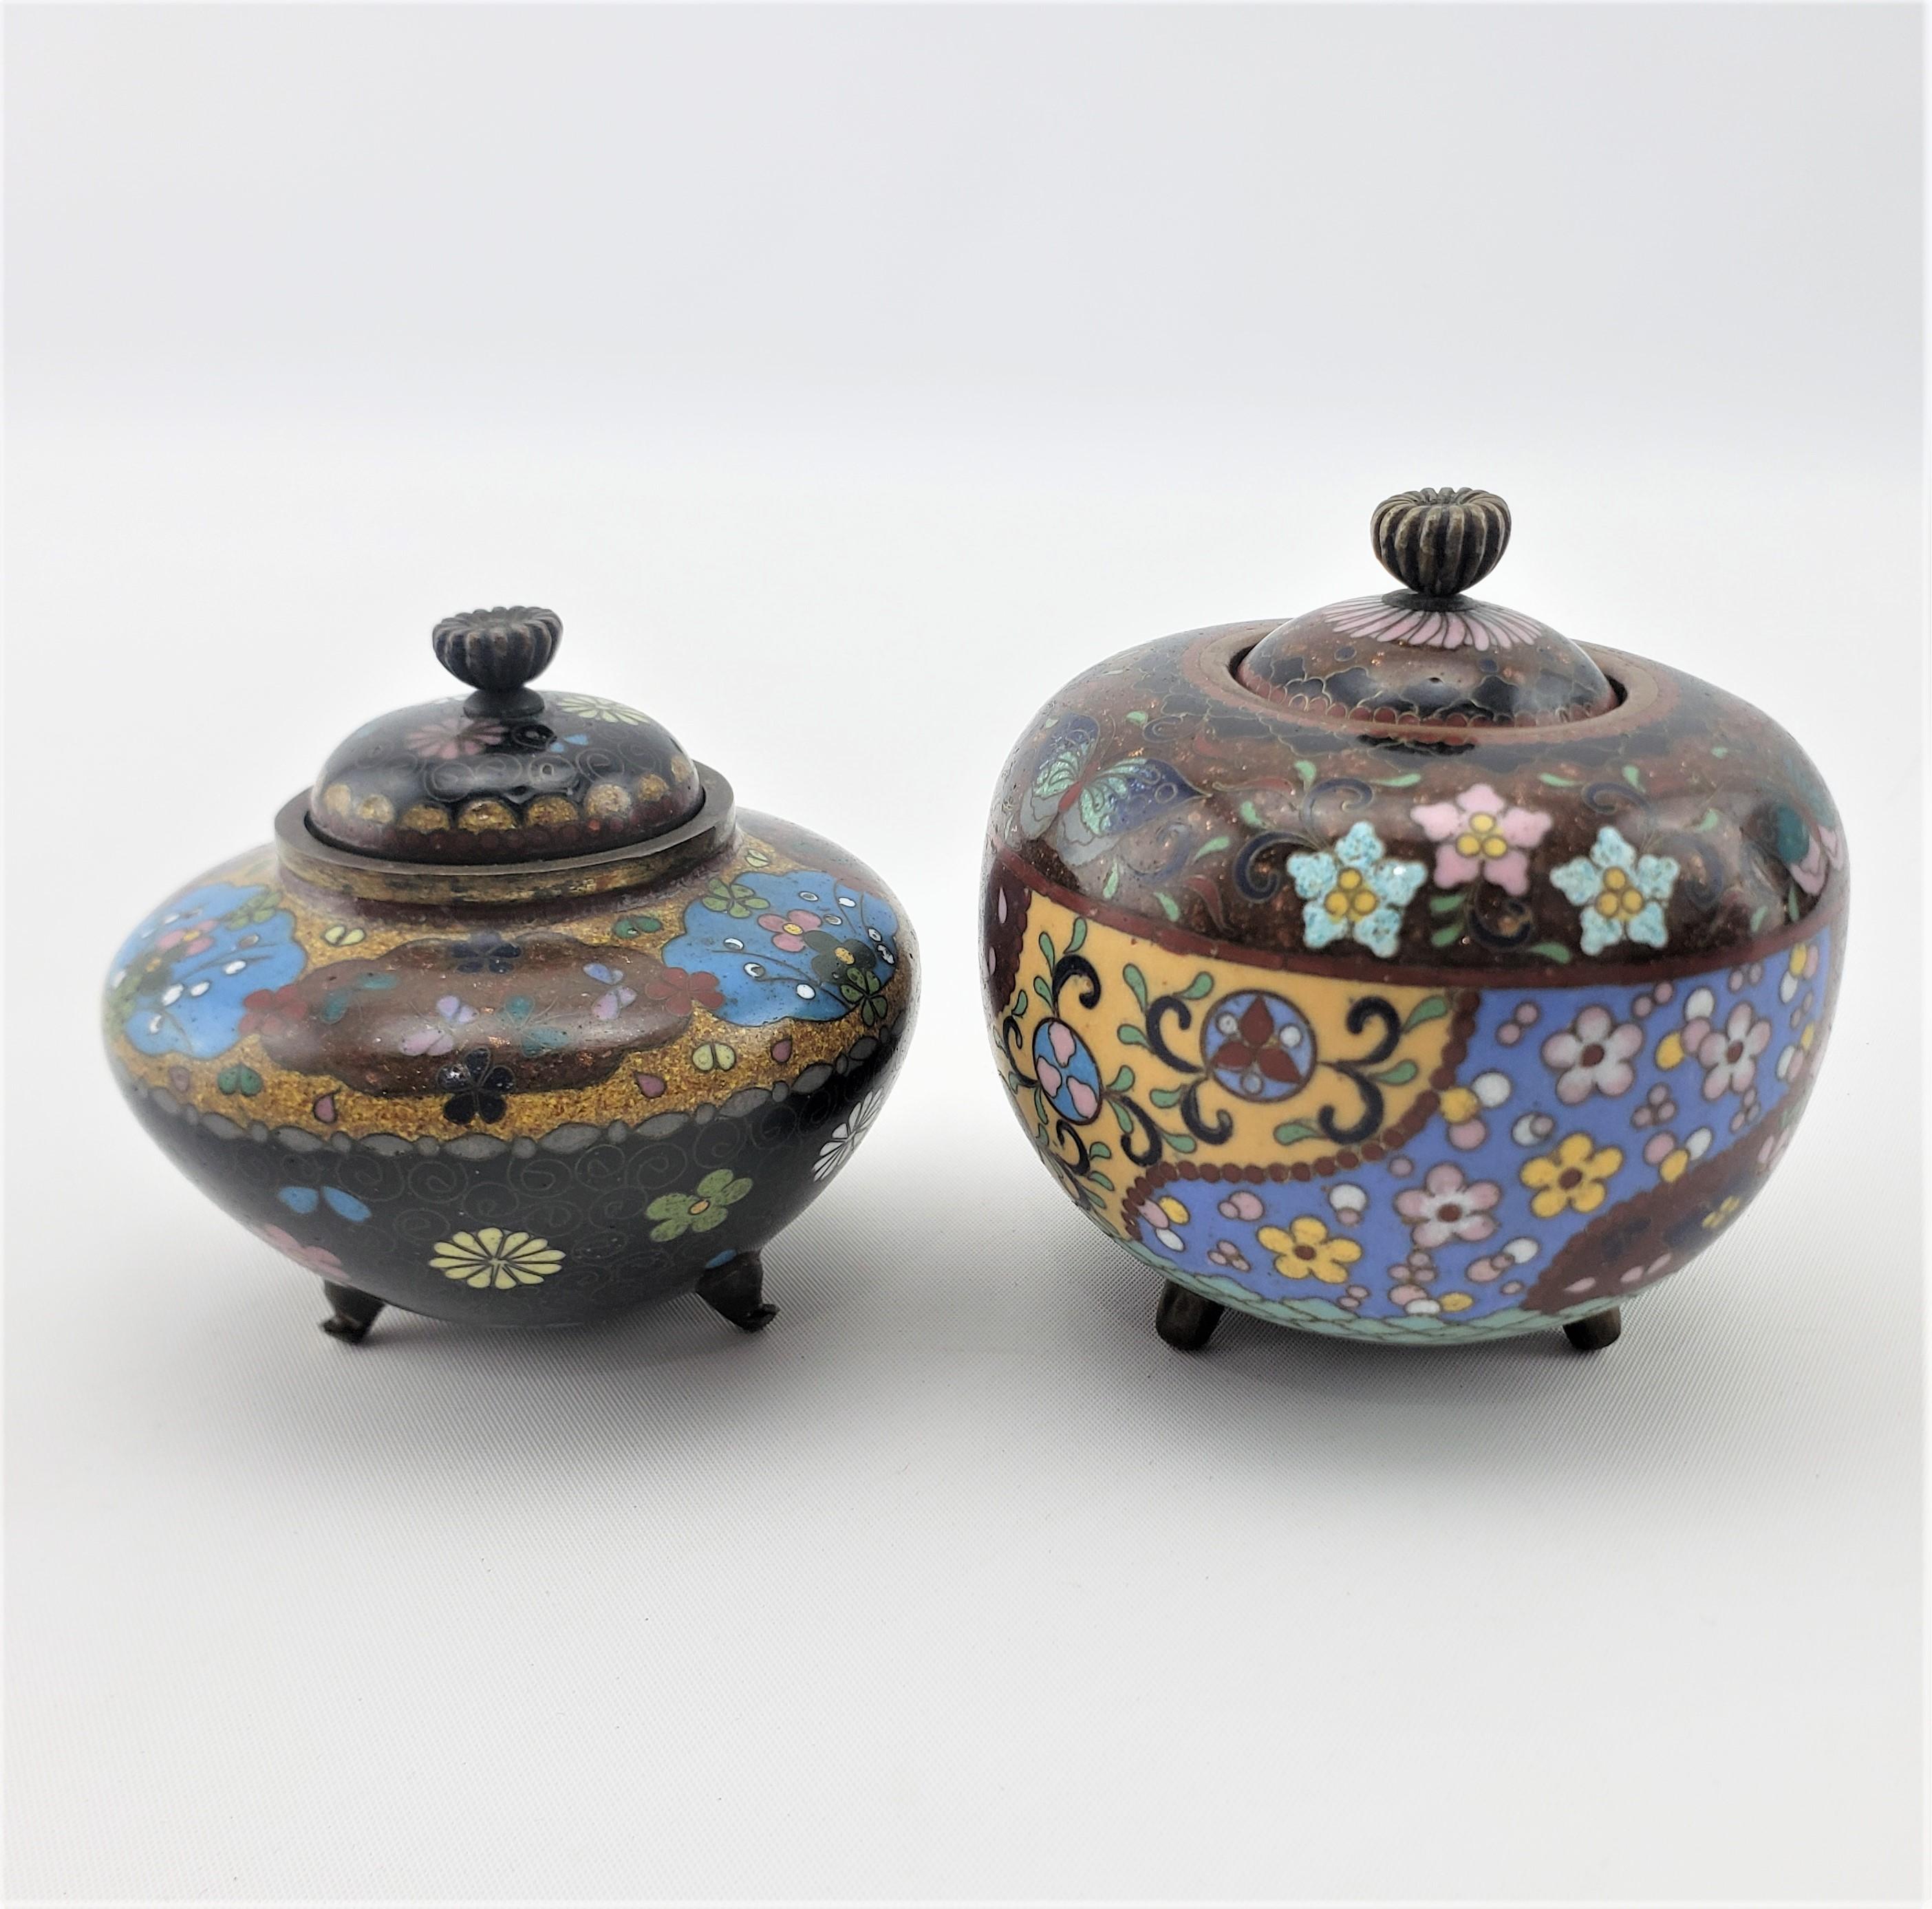 Pair of Antique Japanese Cloisonne Covered Jars with Floral Motif Decoration For Sale 5